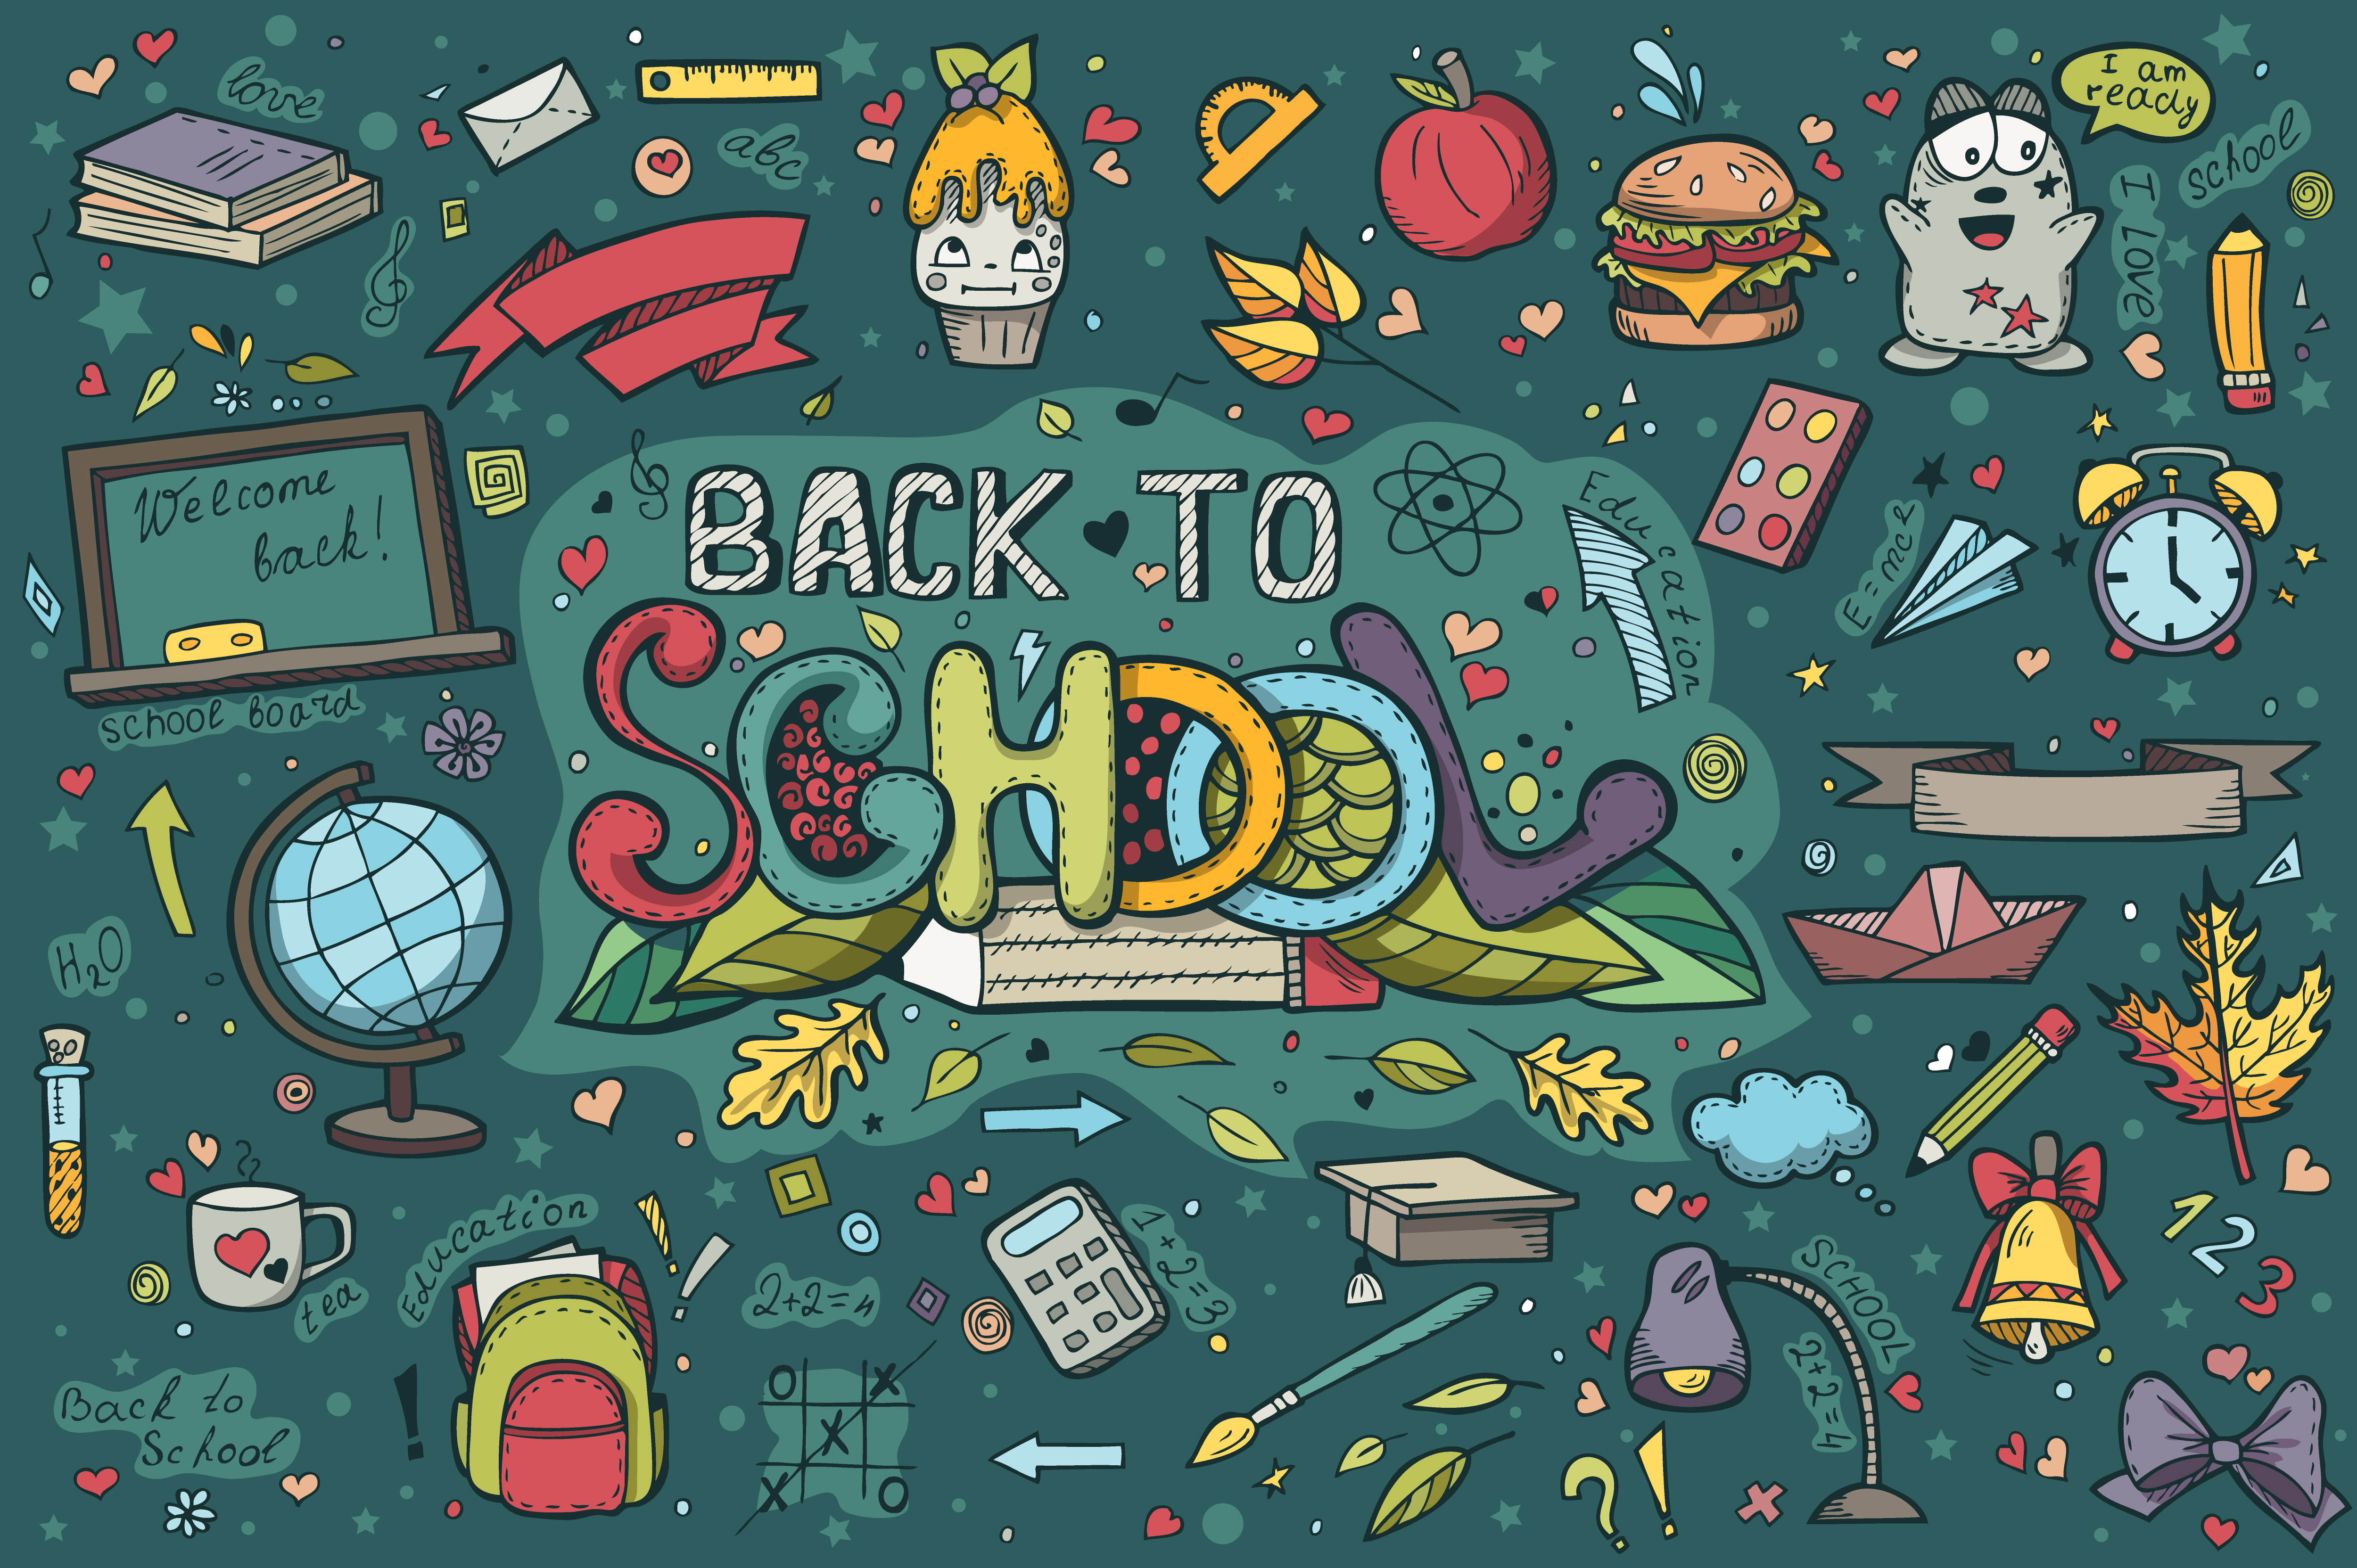 10 Tricks to Make Back to School Easier for Everyone